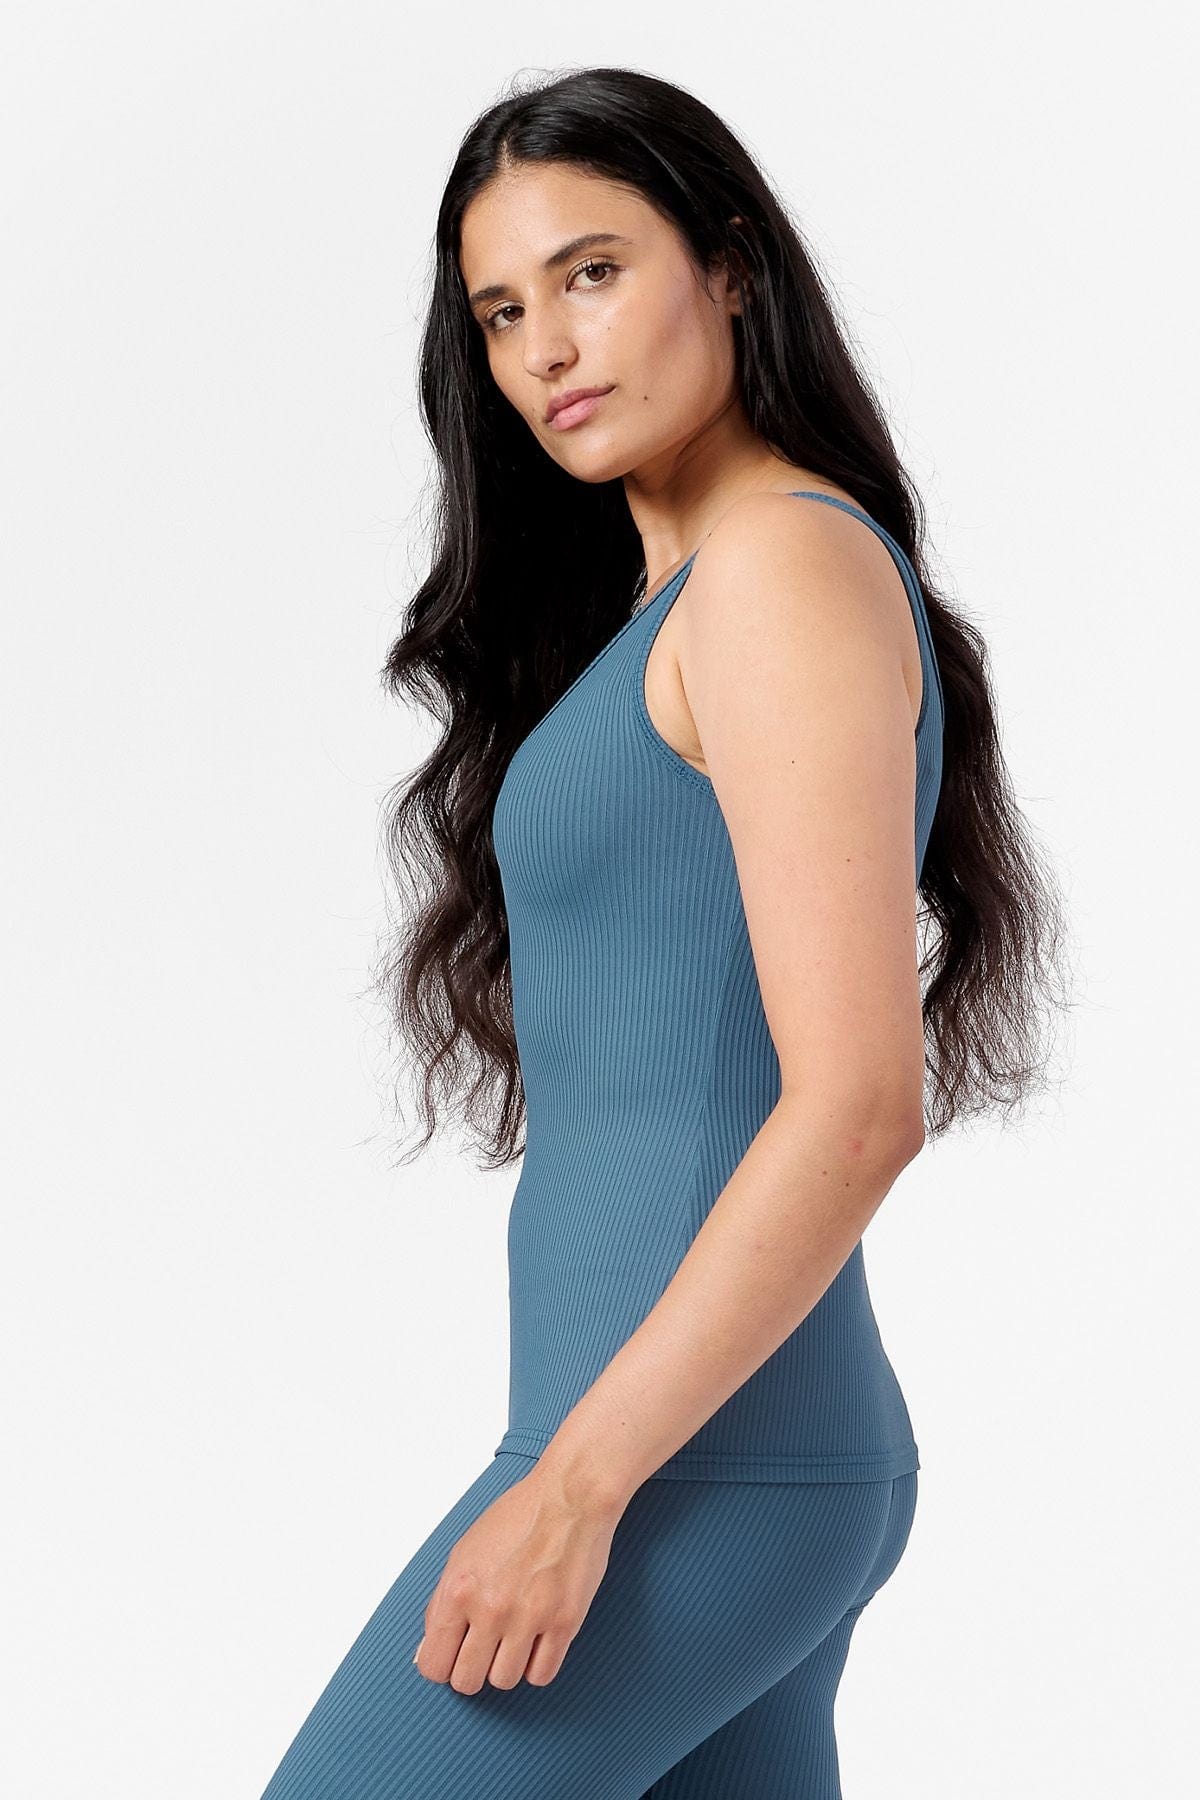 side view of a woman wearing a hip length ribbed teal tank top with matching ribbed  leggings